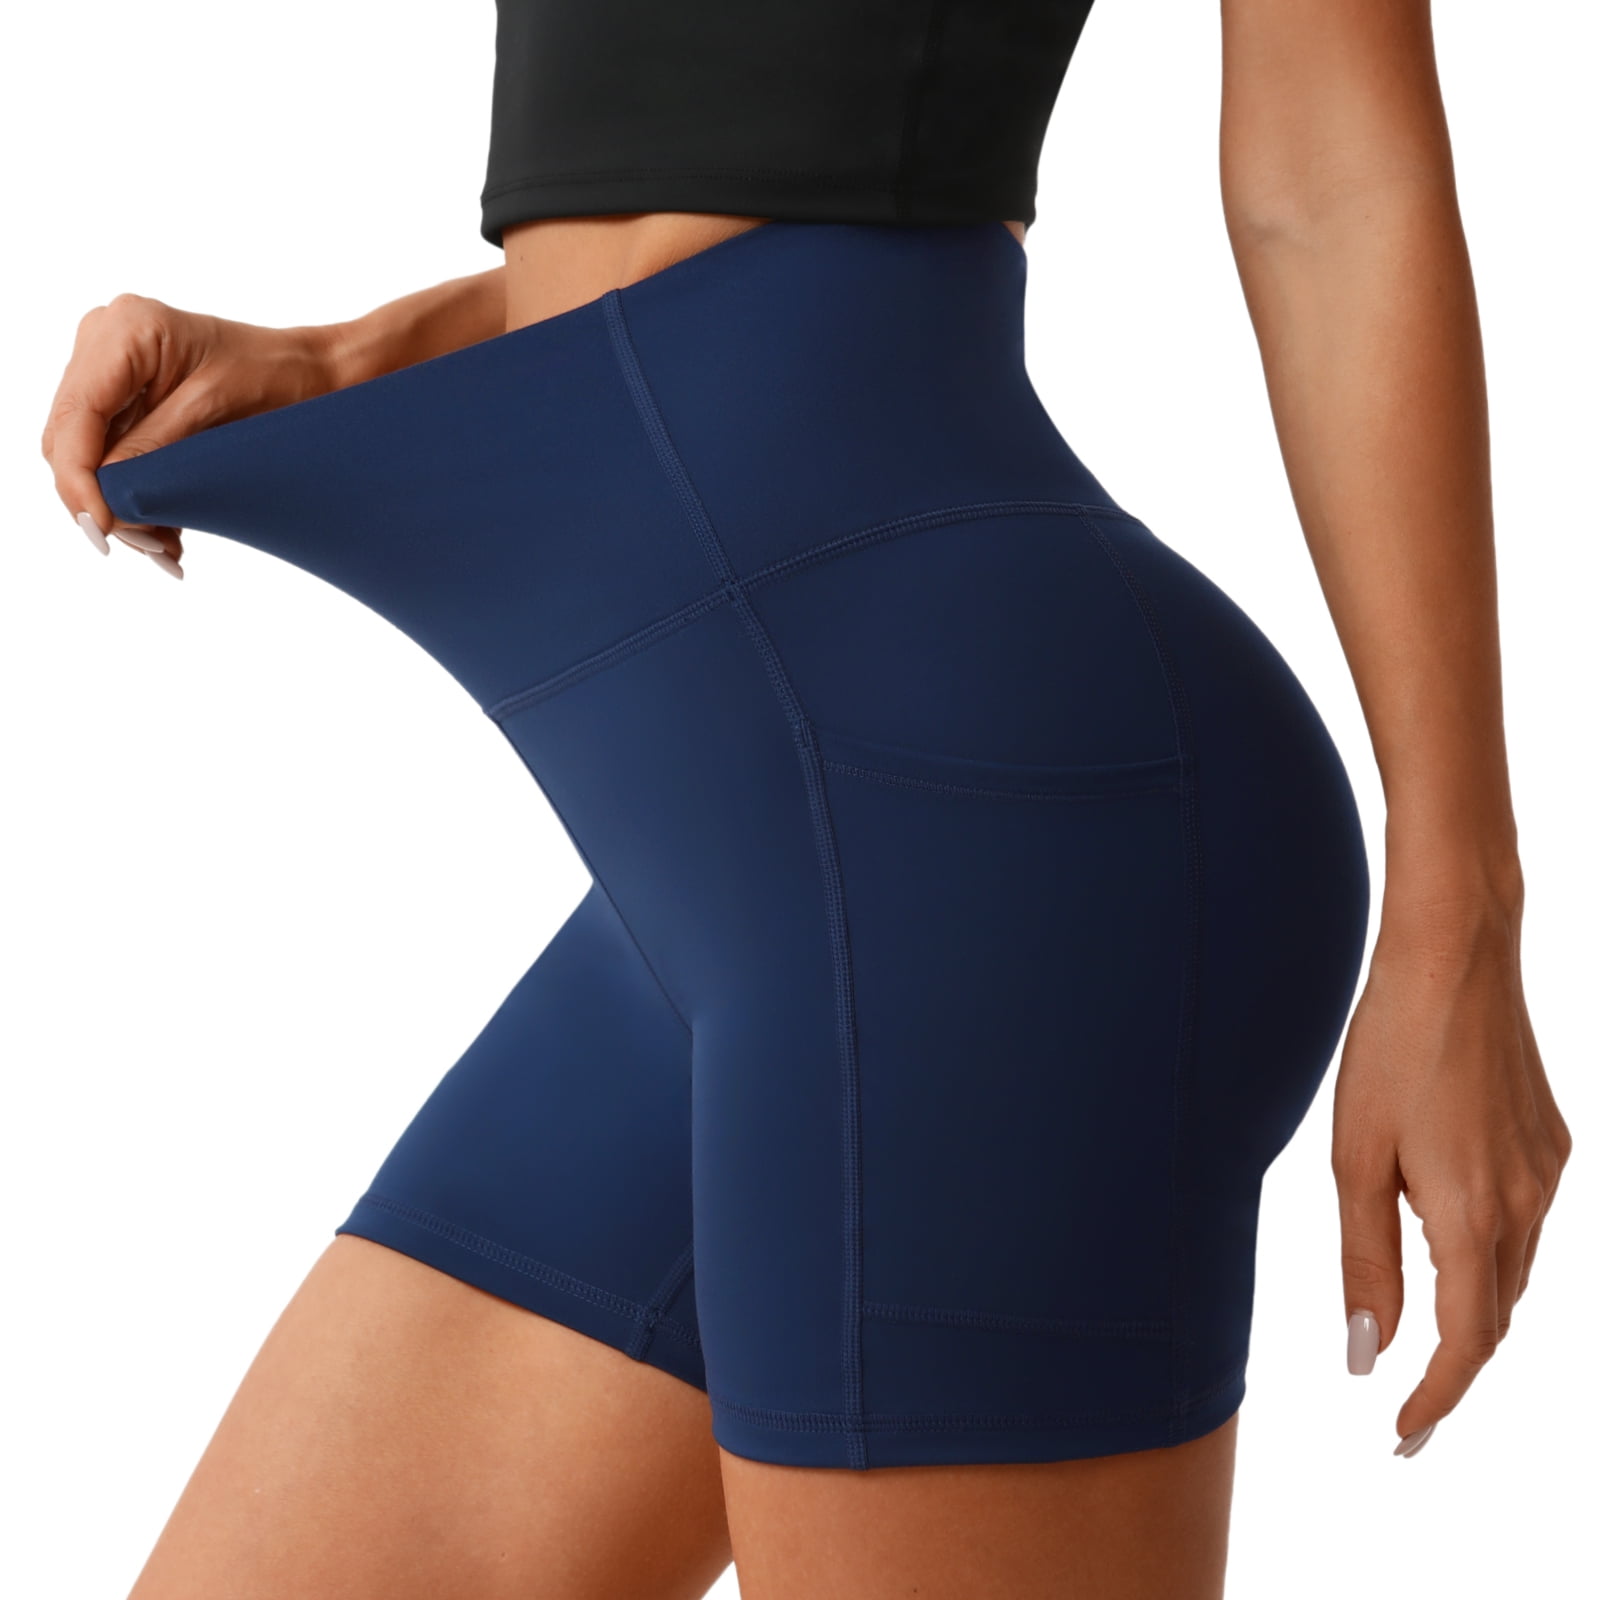 Seamless Nylon Pro Yoga Shorts for Women - Summer High-Waisted Biker  Leggings with Sweat-Wicking Technology for Gym, Sports & Fitness